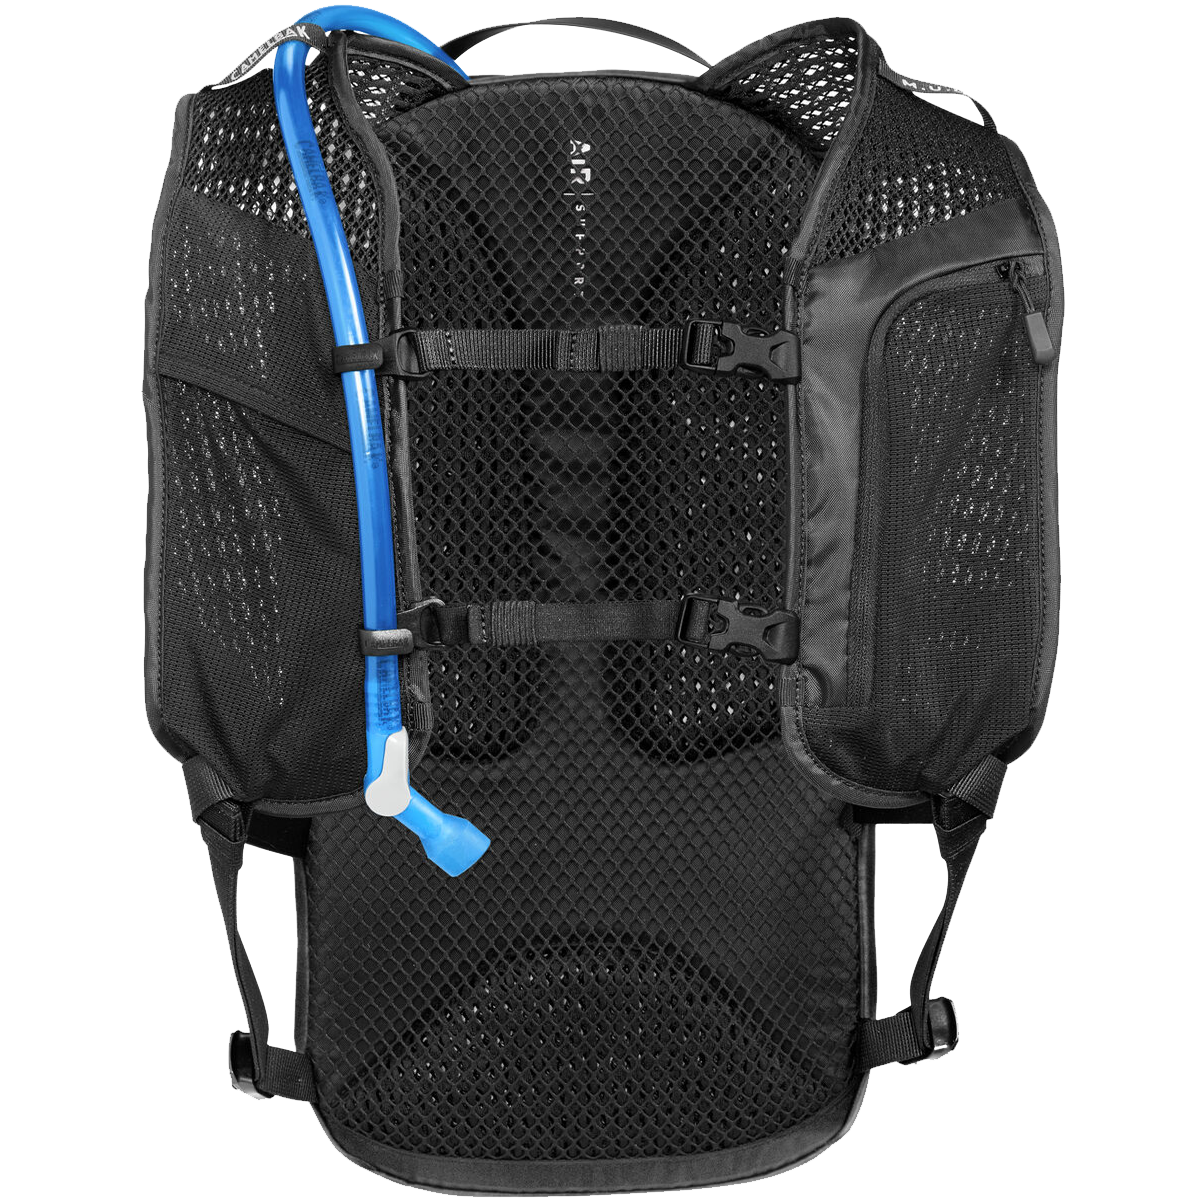 The Camelbak Chase Protector Vest